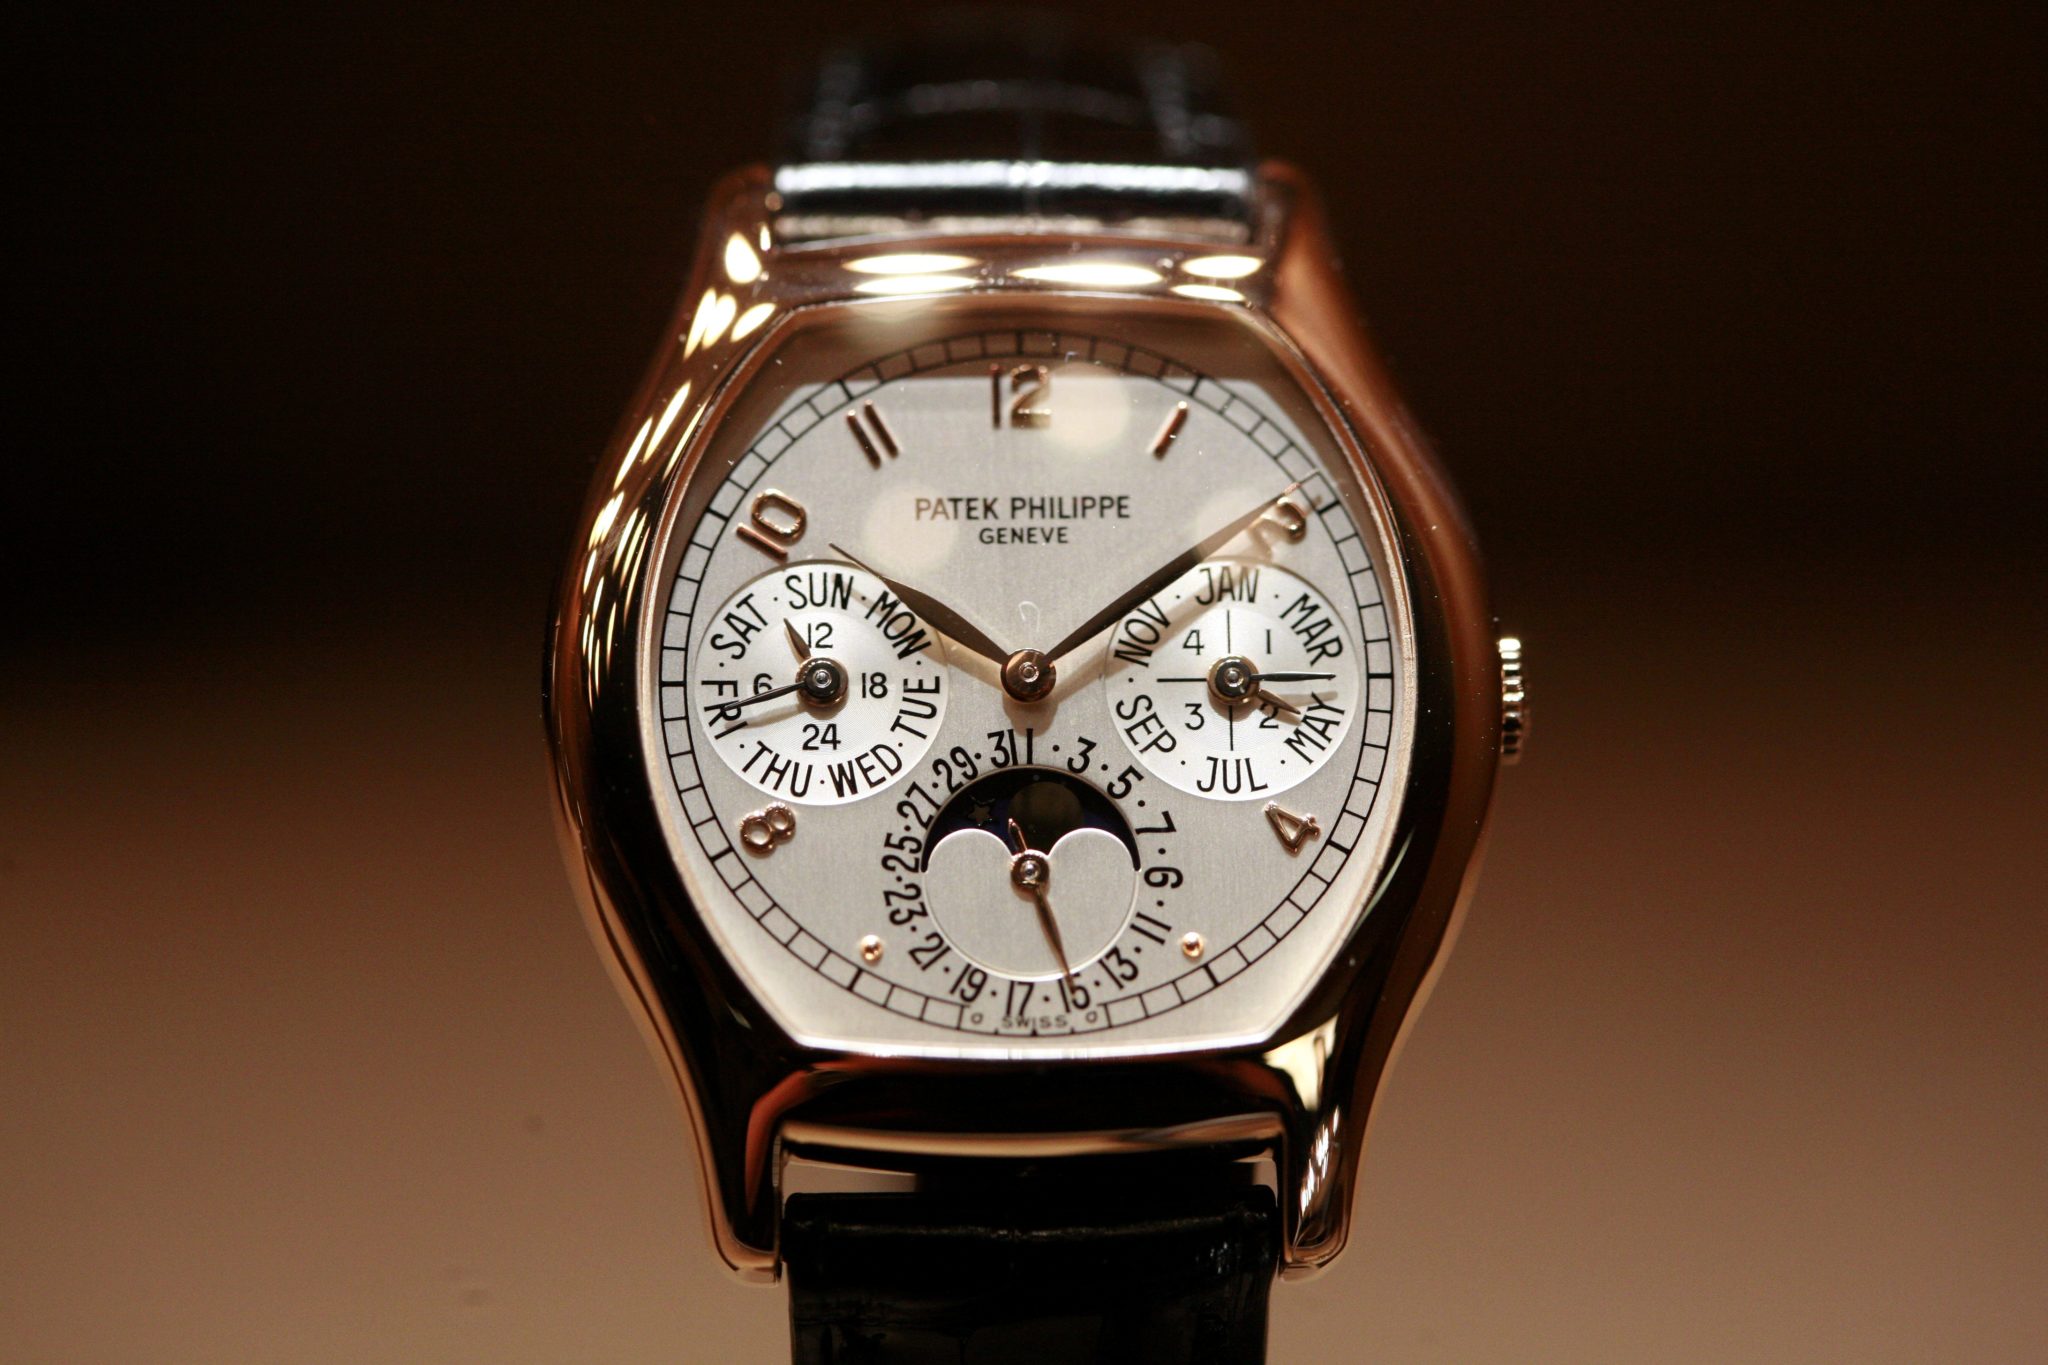 another example of one of the most expensive watch in the world as of 2022 - 2023 